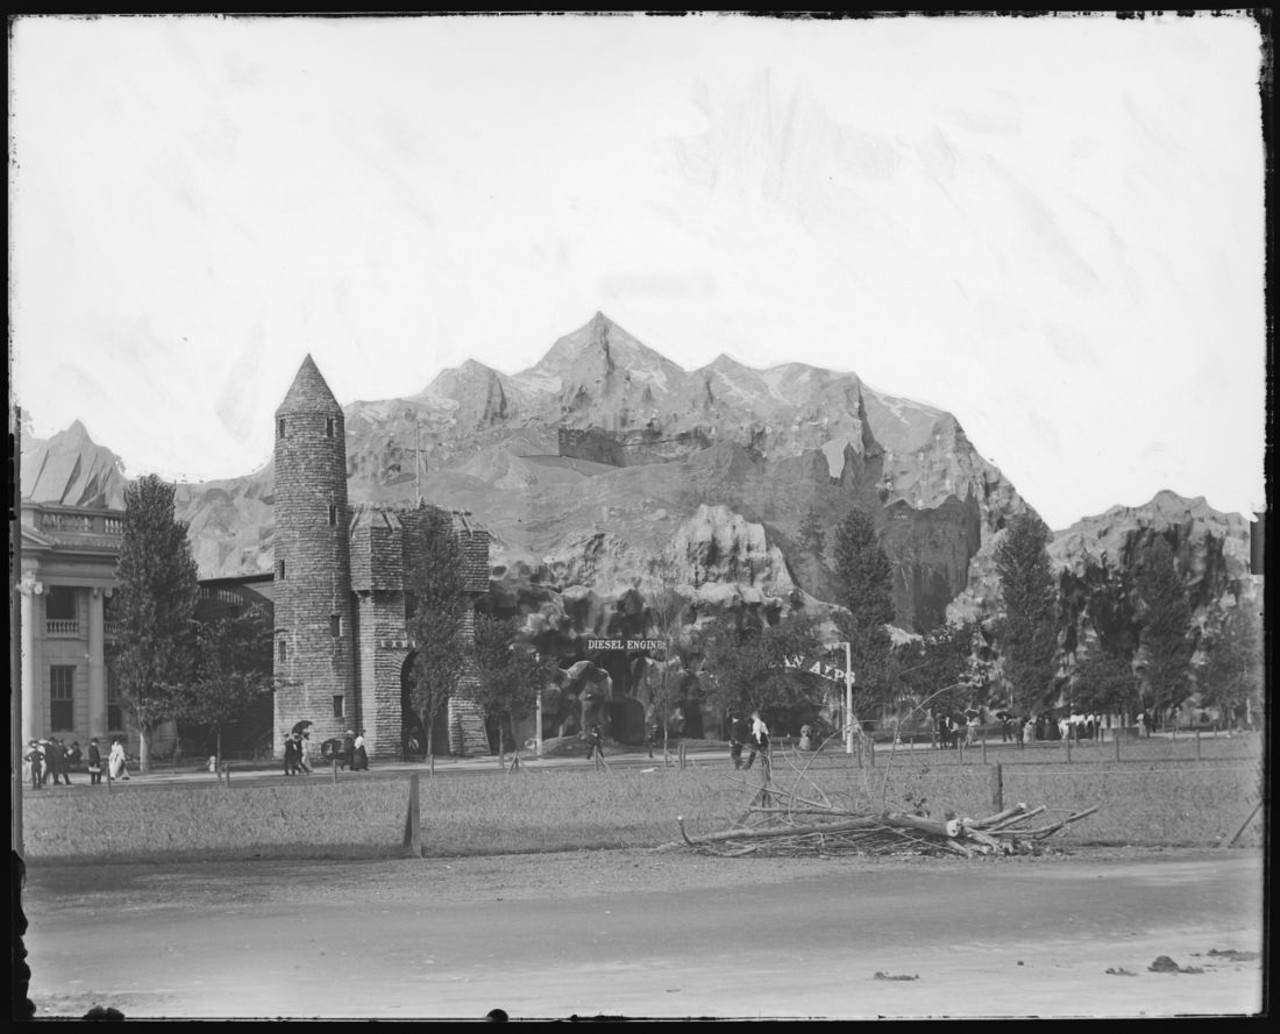 1904 WORLD'S FAIR TYROLEAN ALPS. The Tyrolean Alps featured mountains that rose over 100 feet. The Tyrolean Alps attraction cost 25 cents admission and contained a restaurant, beer hall and Tyrolean village served by a narrow gauge railroad. In the center left is Blarney Castle which was part of the Irish Village attraction on the Pike and cost 25 cents admission.
Find out more about this photo at MoHistory.org.